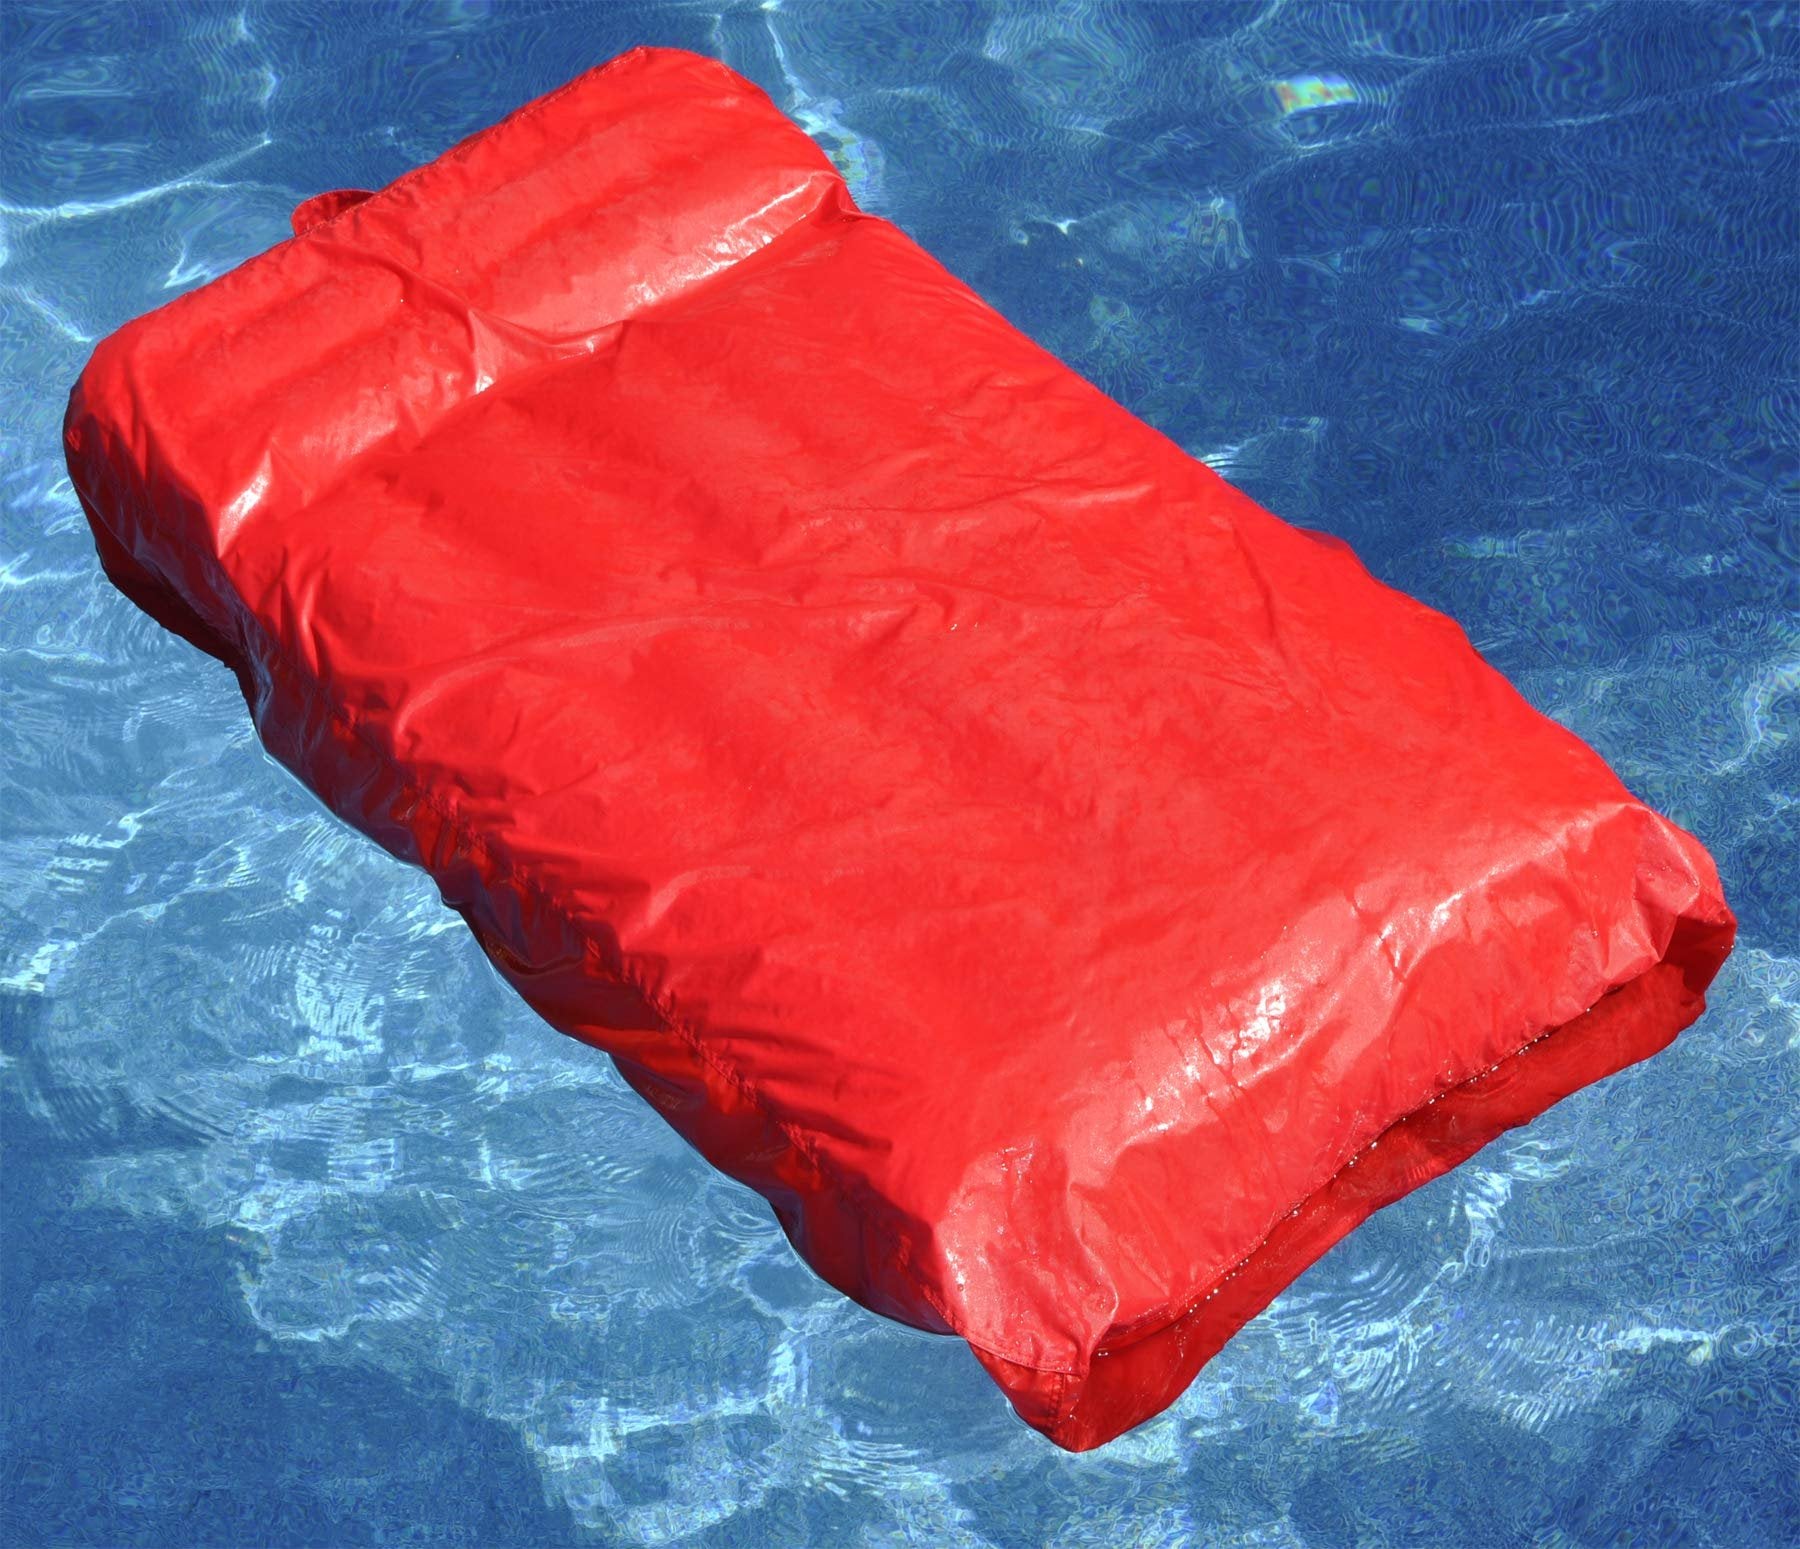 SWIMLINE SOLSTICE Fabric Covered Pool Float Mattress Red Lounger Raft For Adults & Kids I Comfortable Head Back Rest & Quick-Dry Cover For Adult Or Kid Floating & Lounging Dogs 15030R